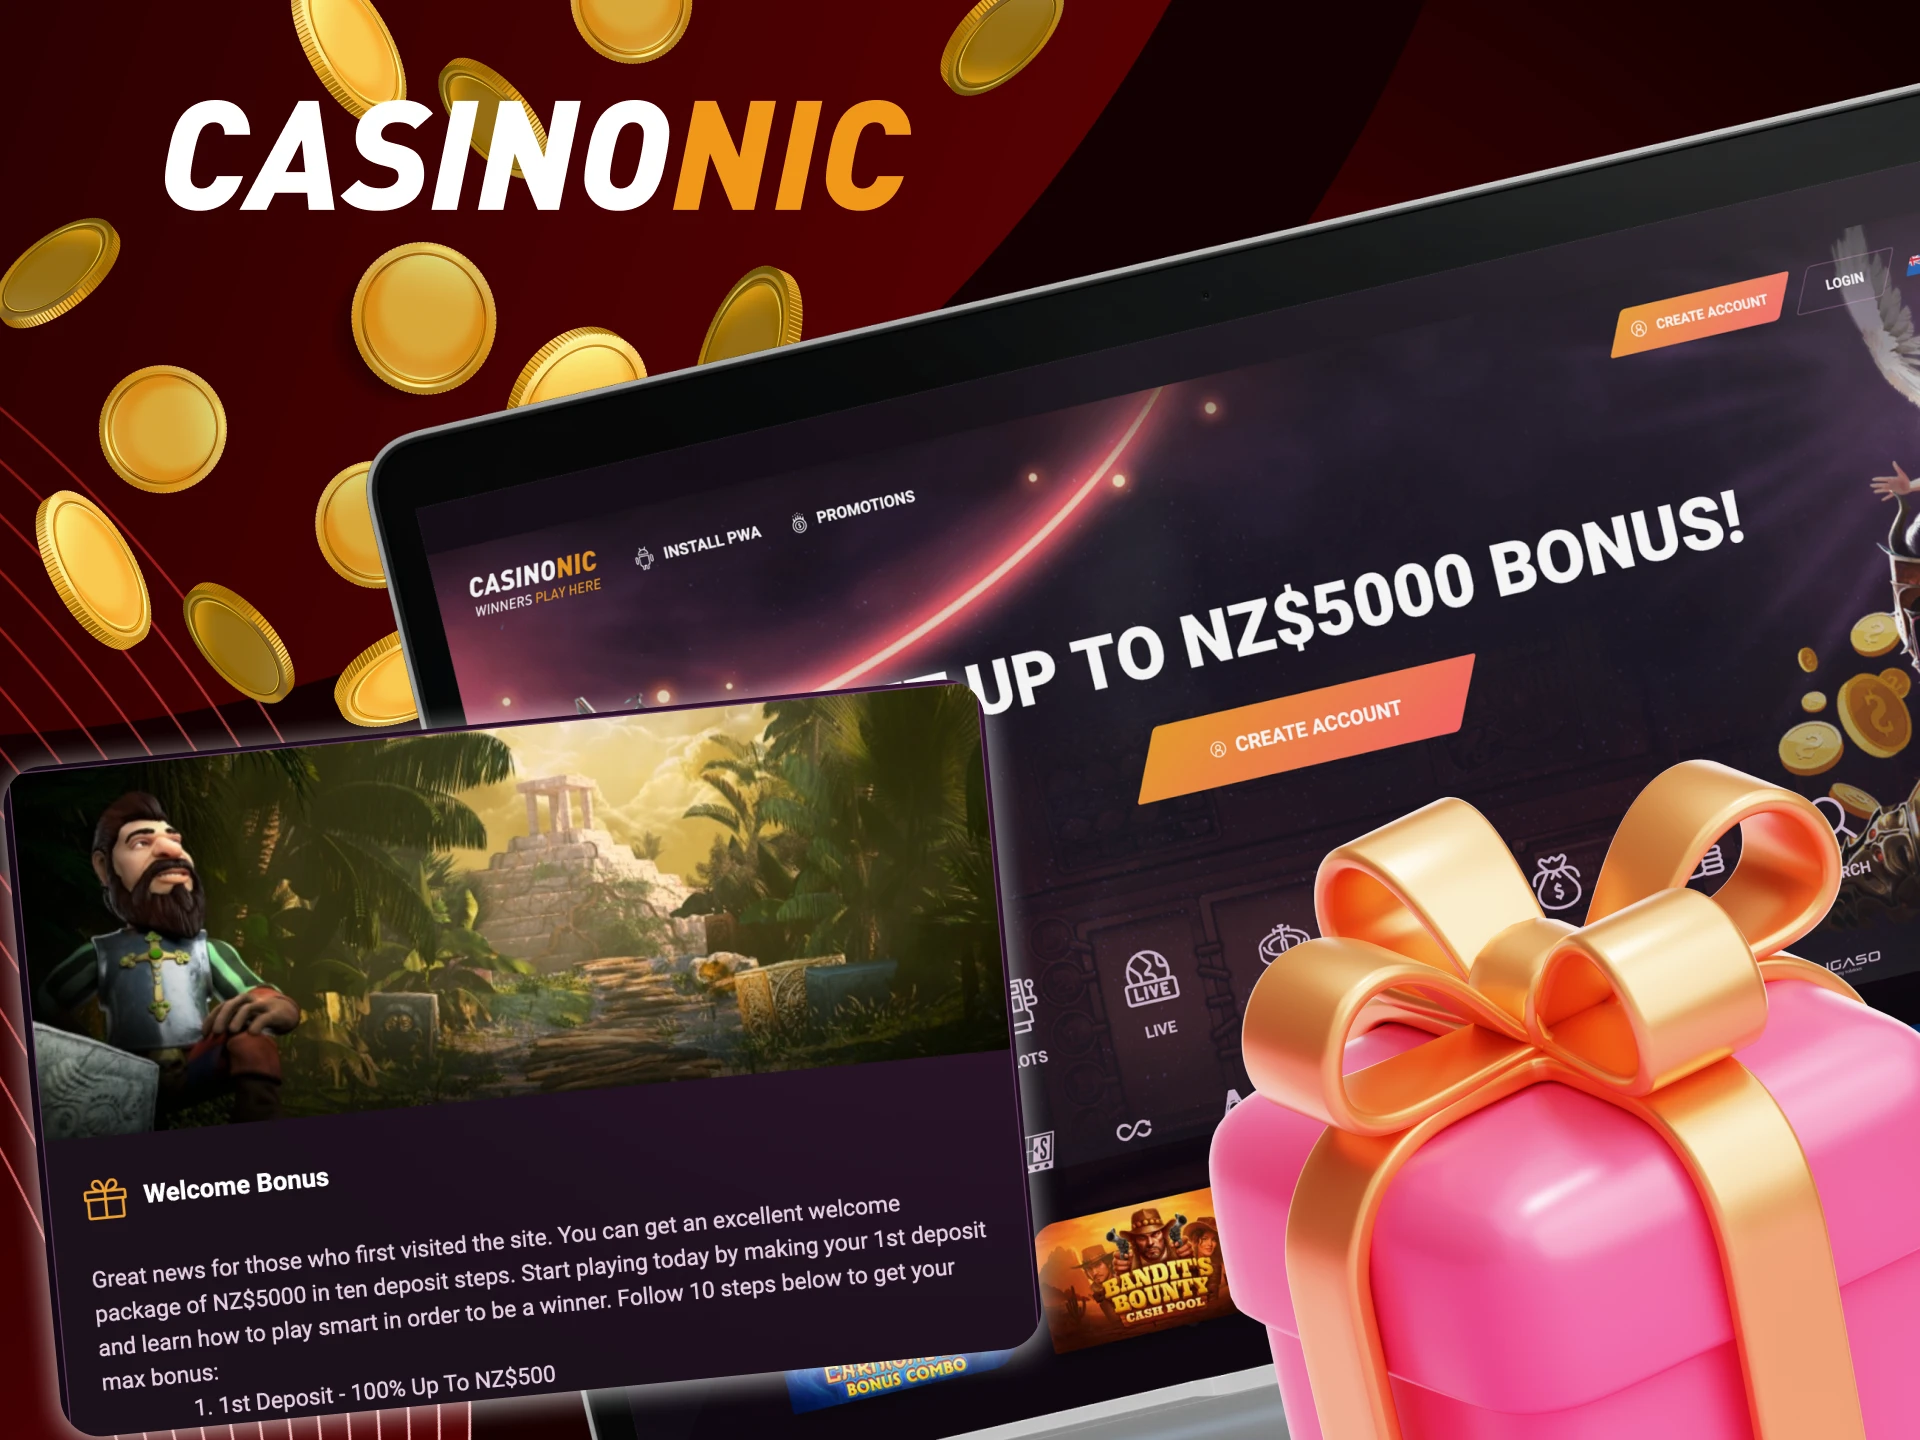 Is there a first deposit bonus at CasinoNic online casino.